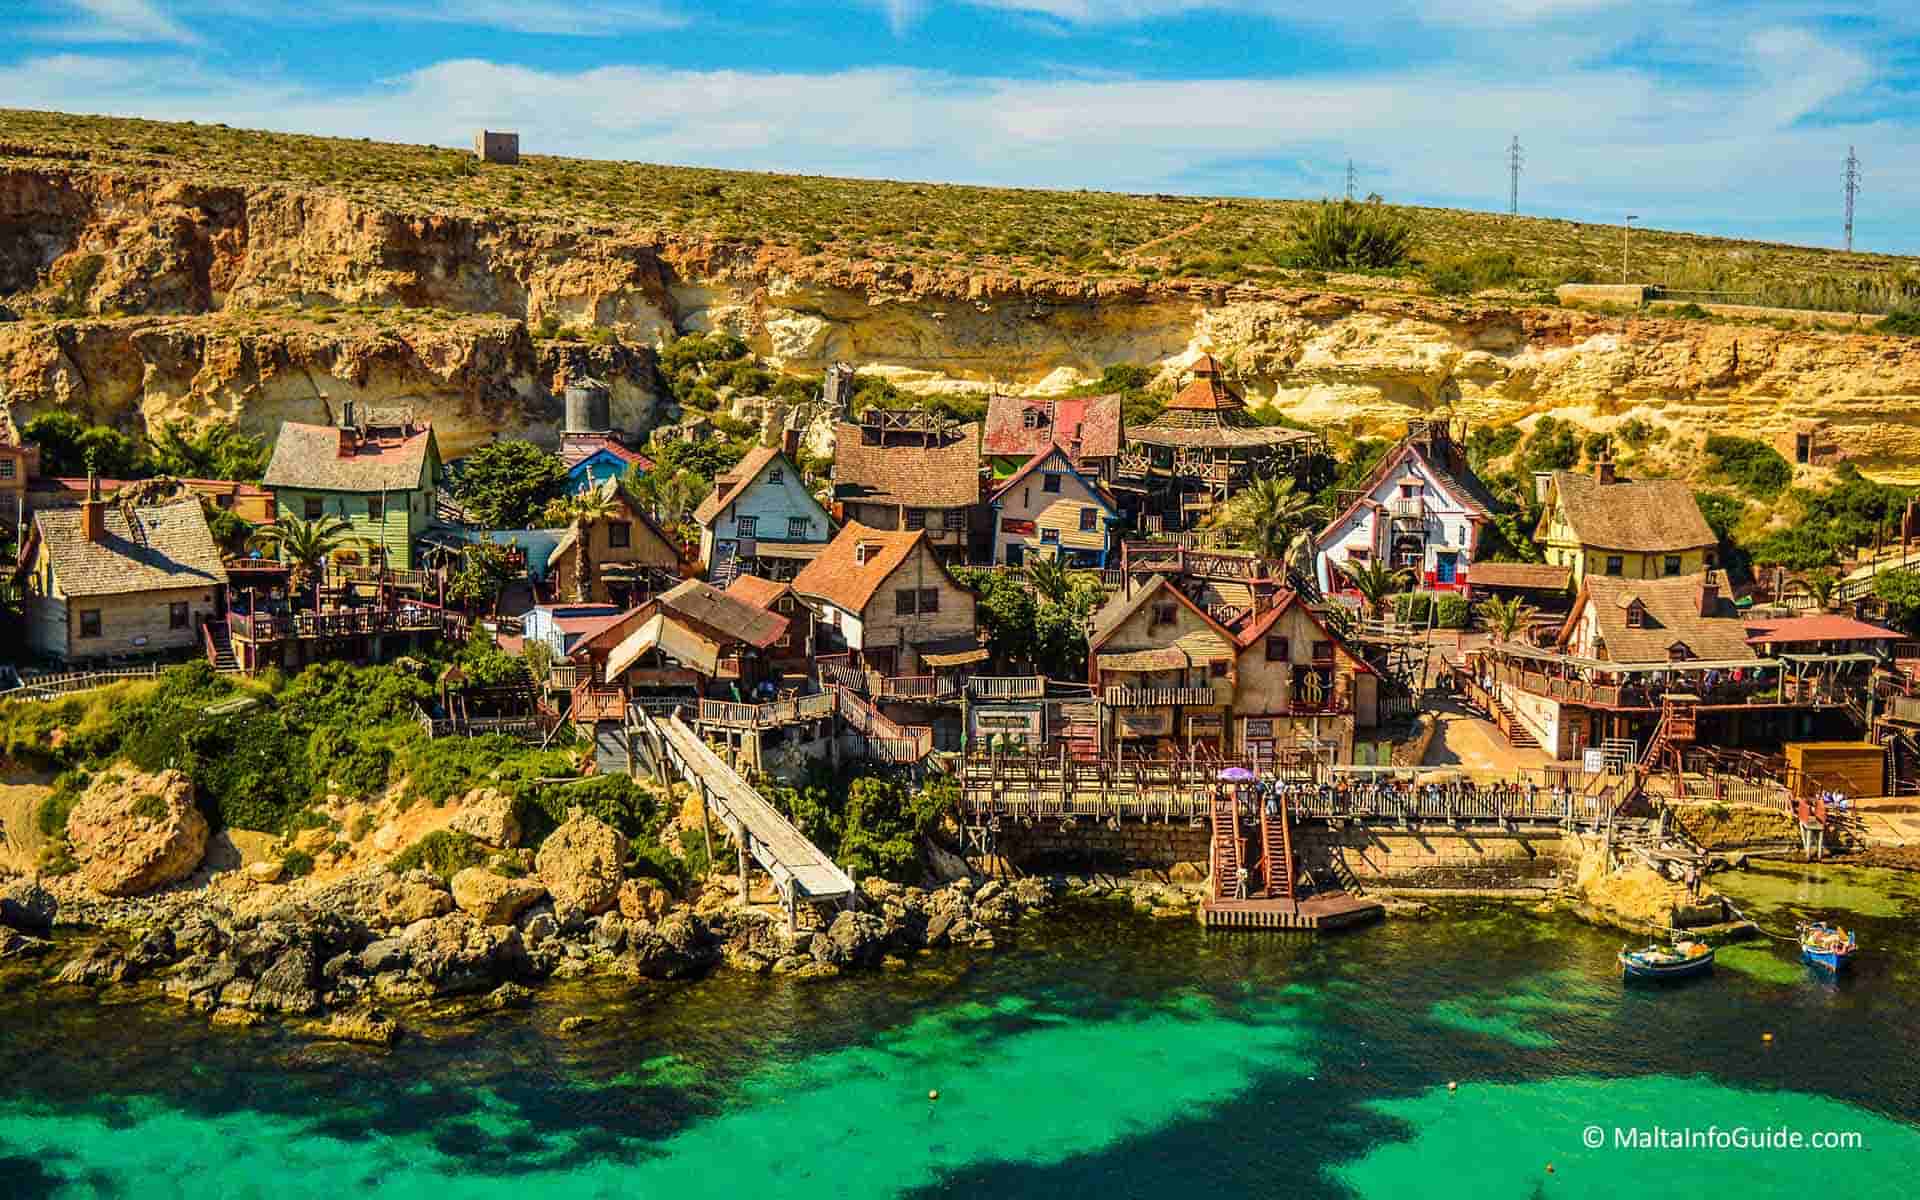 Listed as one of the best hiking trails in Malta. The beautiful popeye village during the day